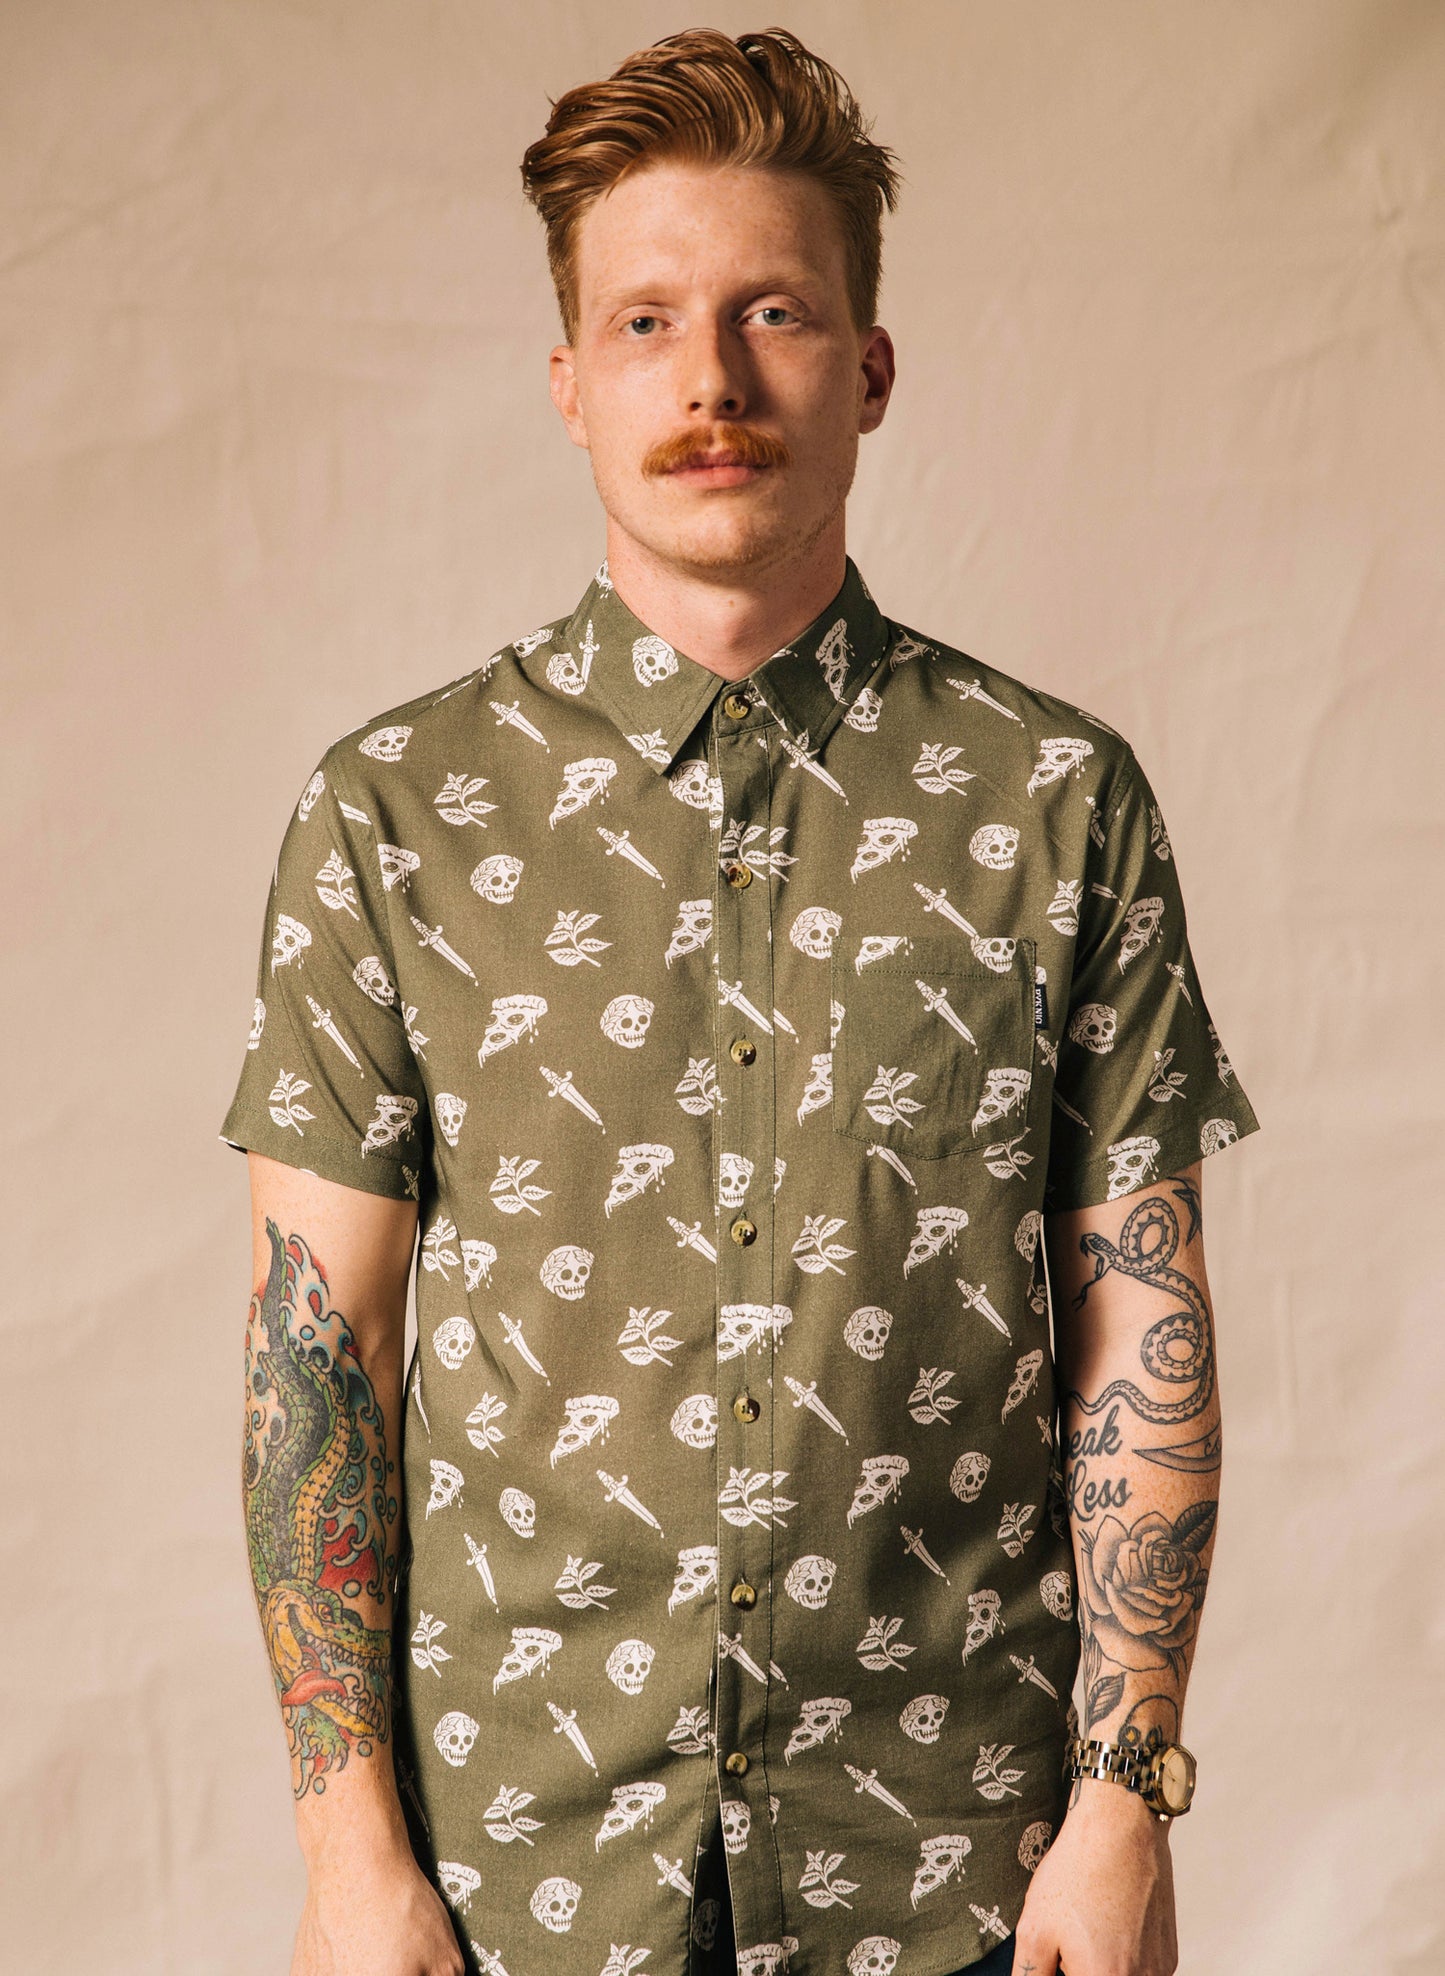 Pyknic | Pizza Slayer Vacation Casual Button-Up Shirt | Button Down Shirt with All Over Graphic Print, Pizzeria Food Shirt, Cool Food Shirt, Best Foodie Shirt, Best Foodie Gift, Food Themed Apparel, Food Tattoo Flash, Pizza Pattern Button Down Shirt, Dagger Tattoo, Cool Button Up Shirts